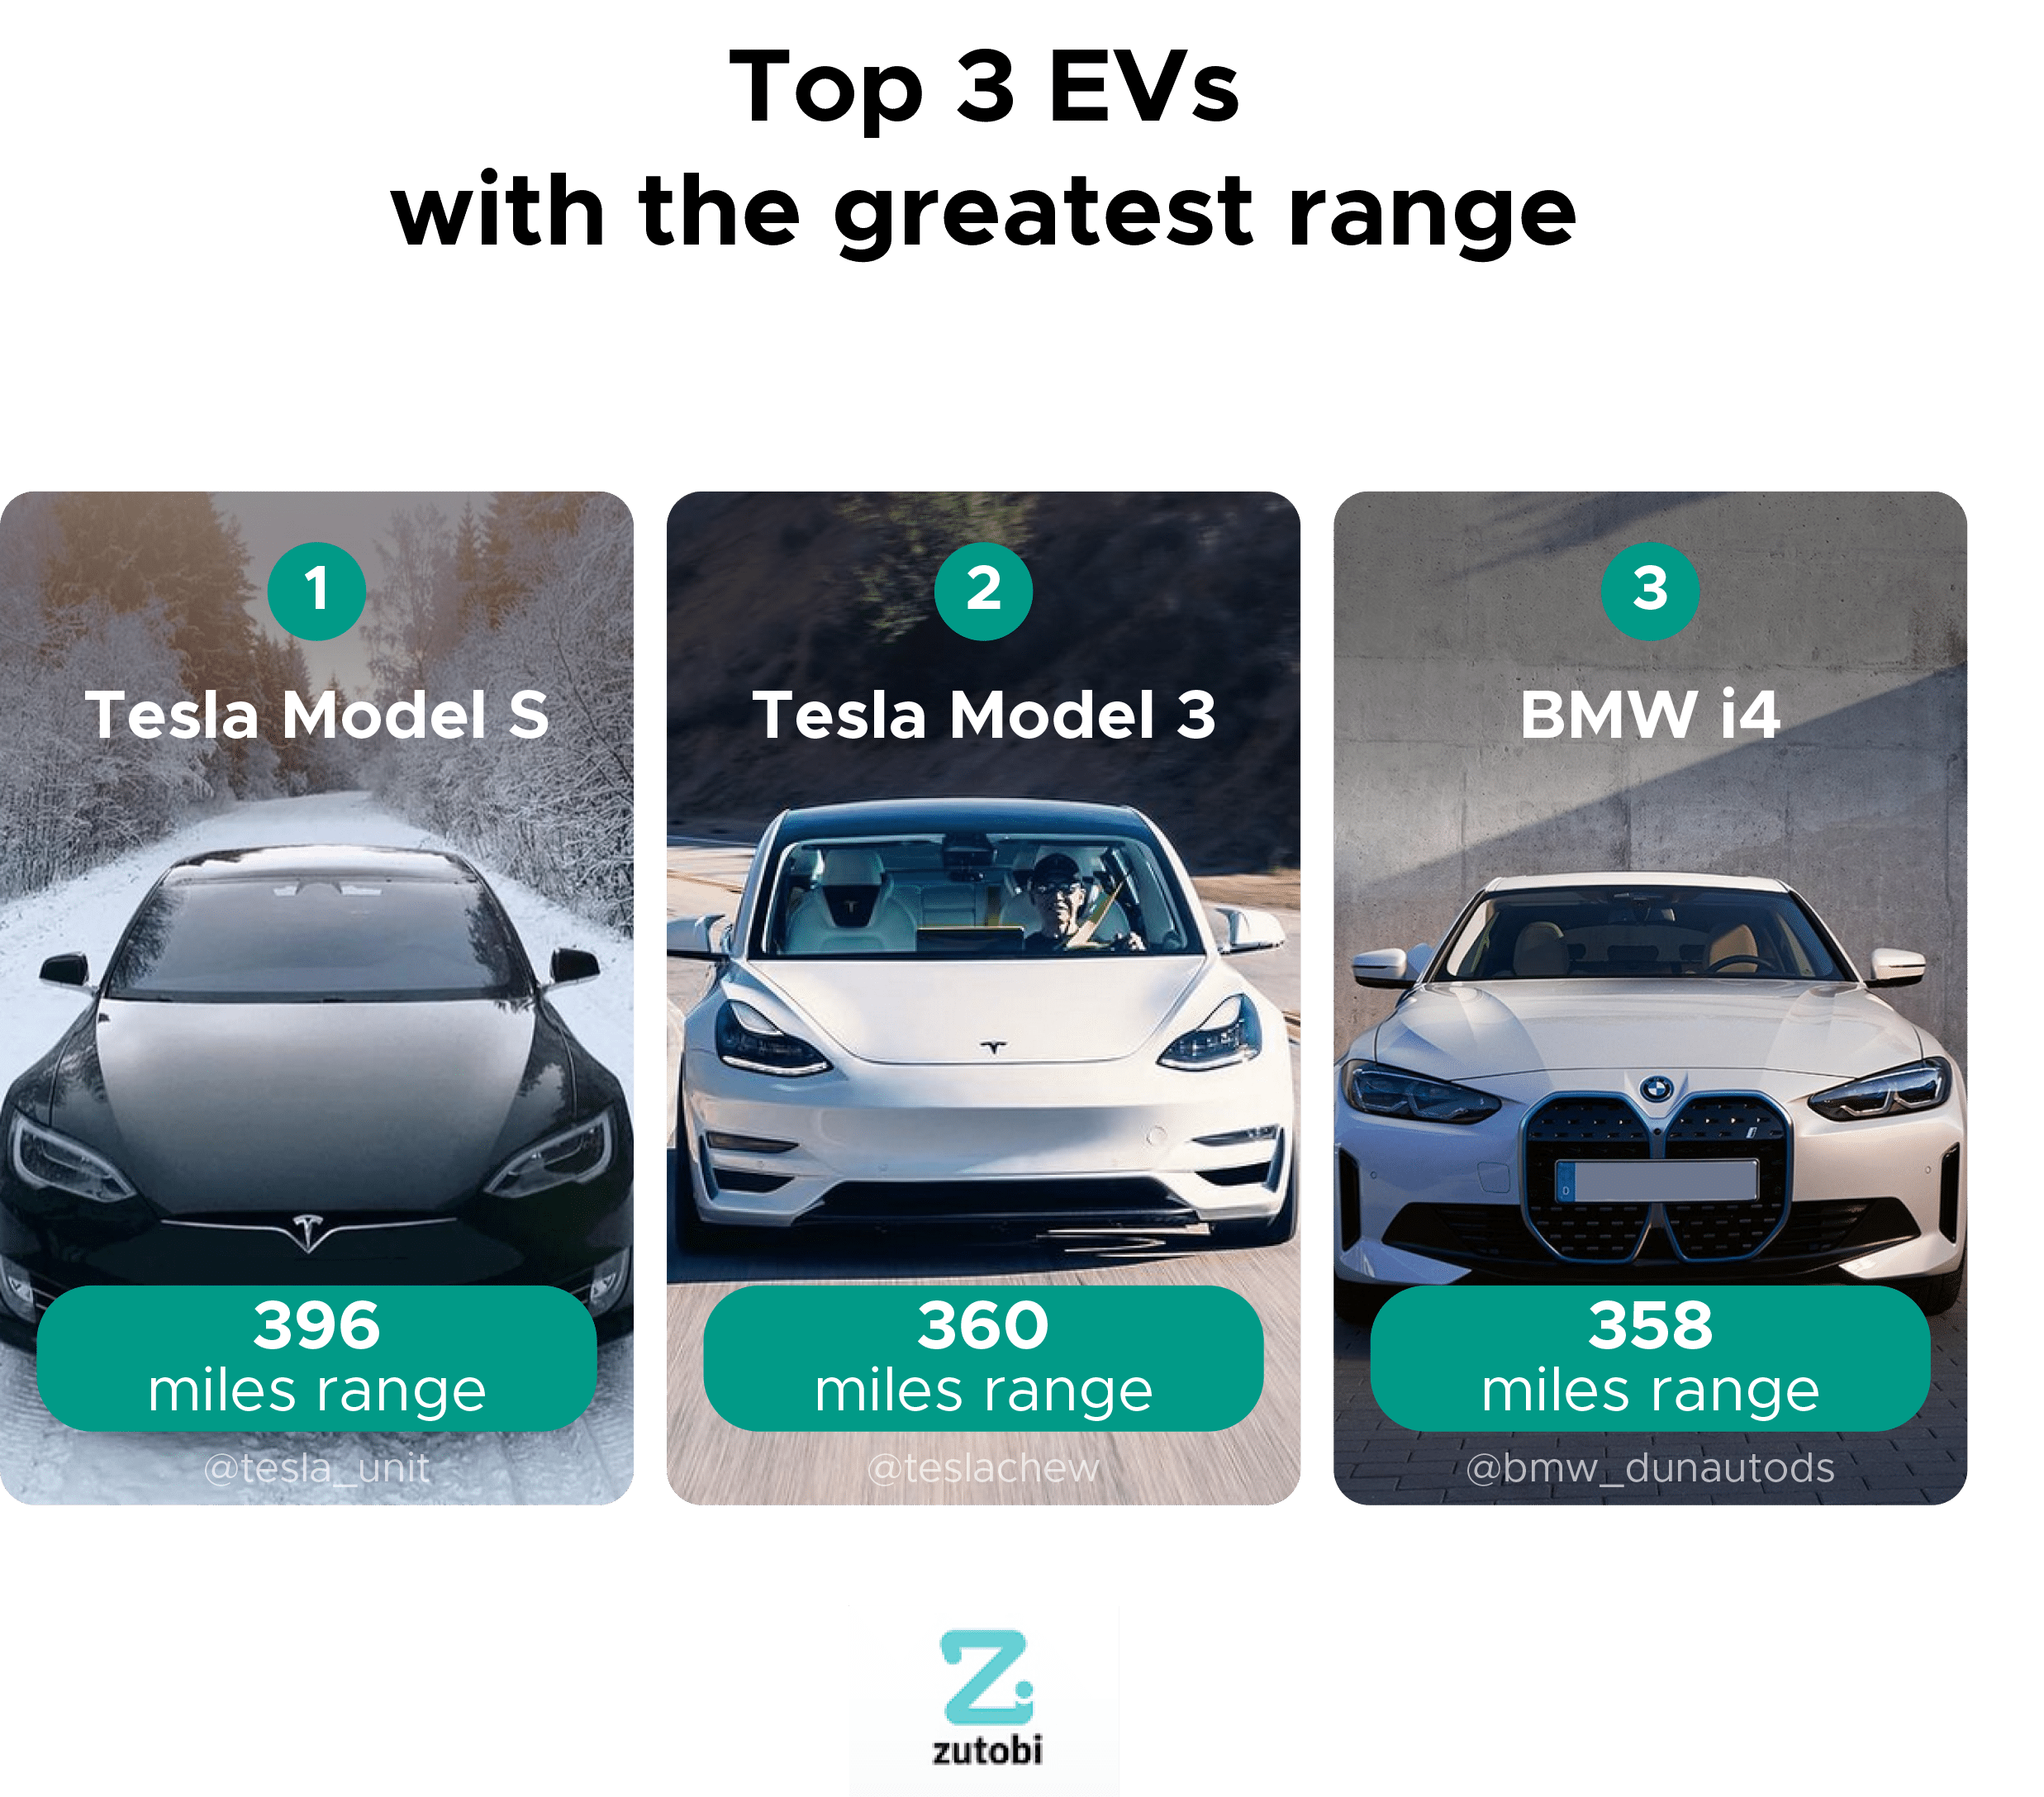 Top 3 EVs with the greatest range